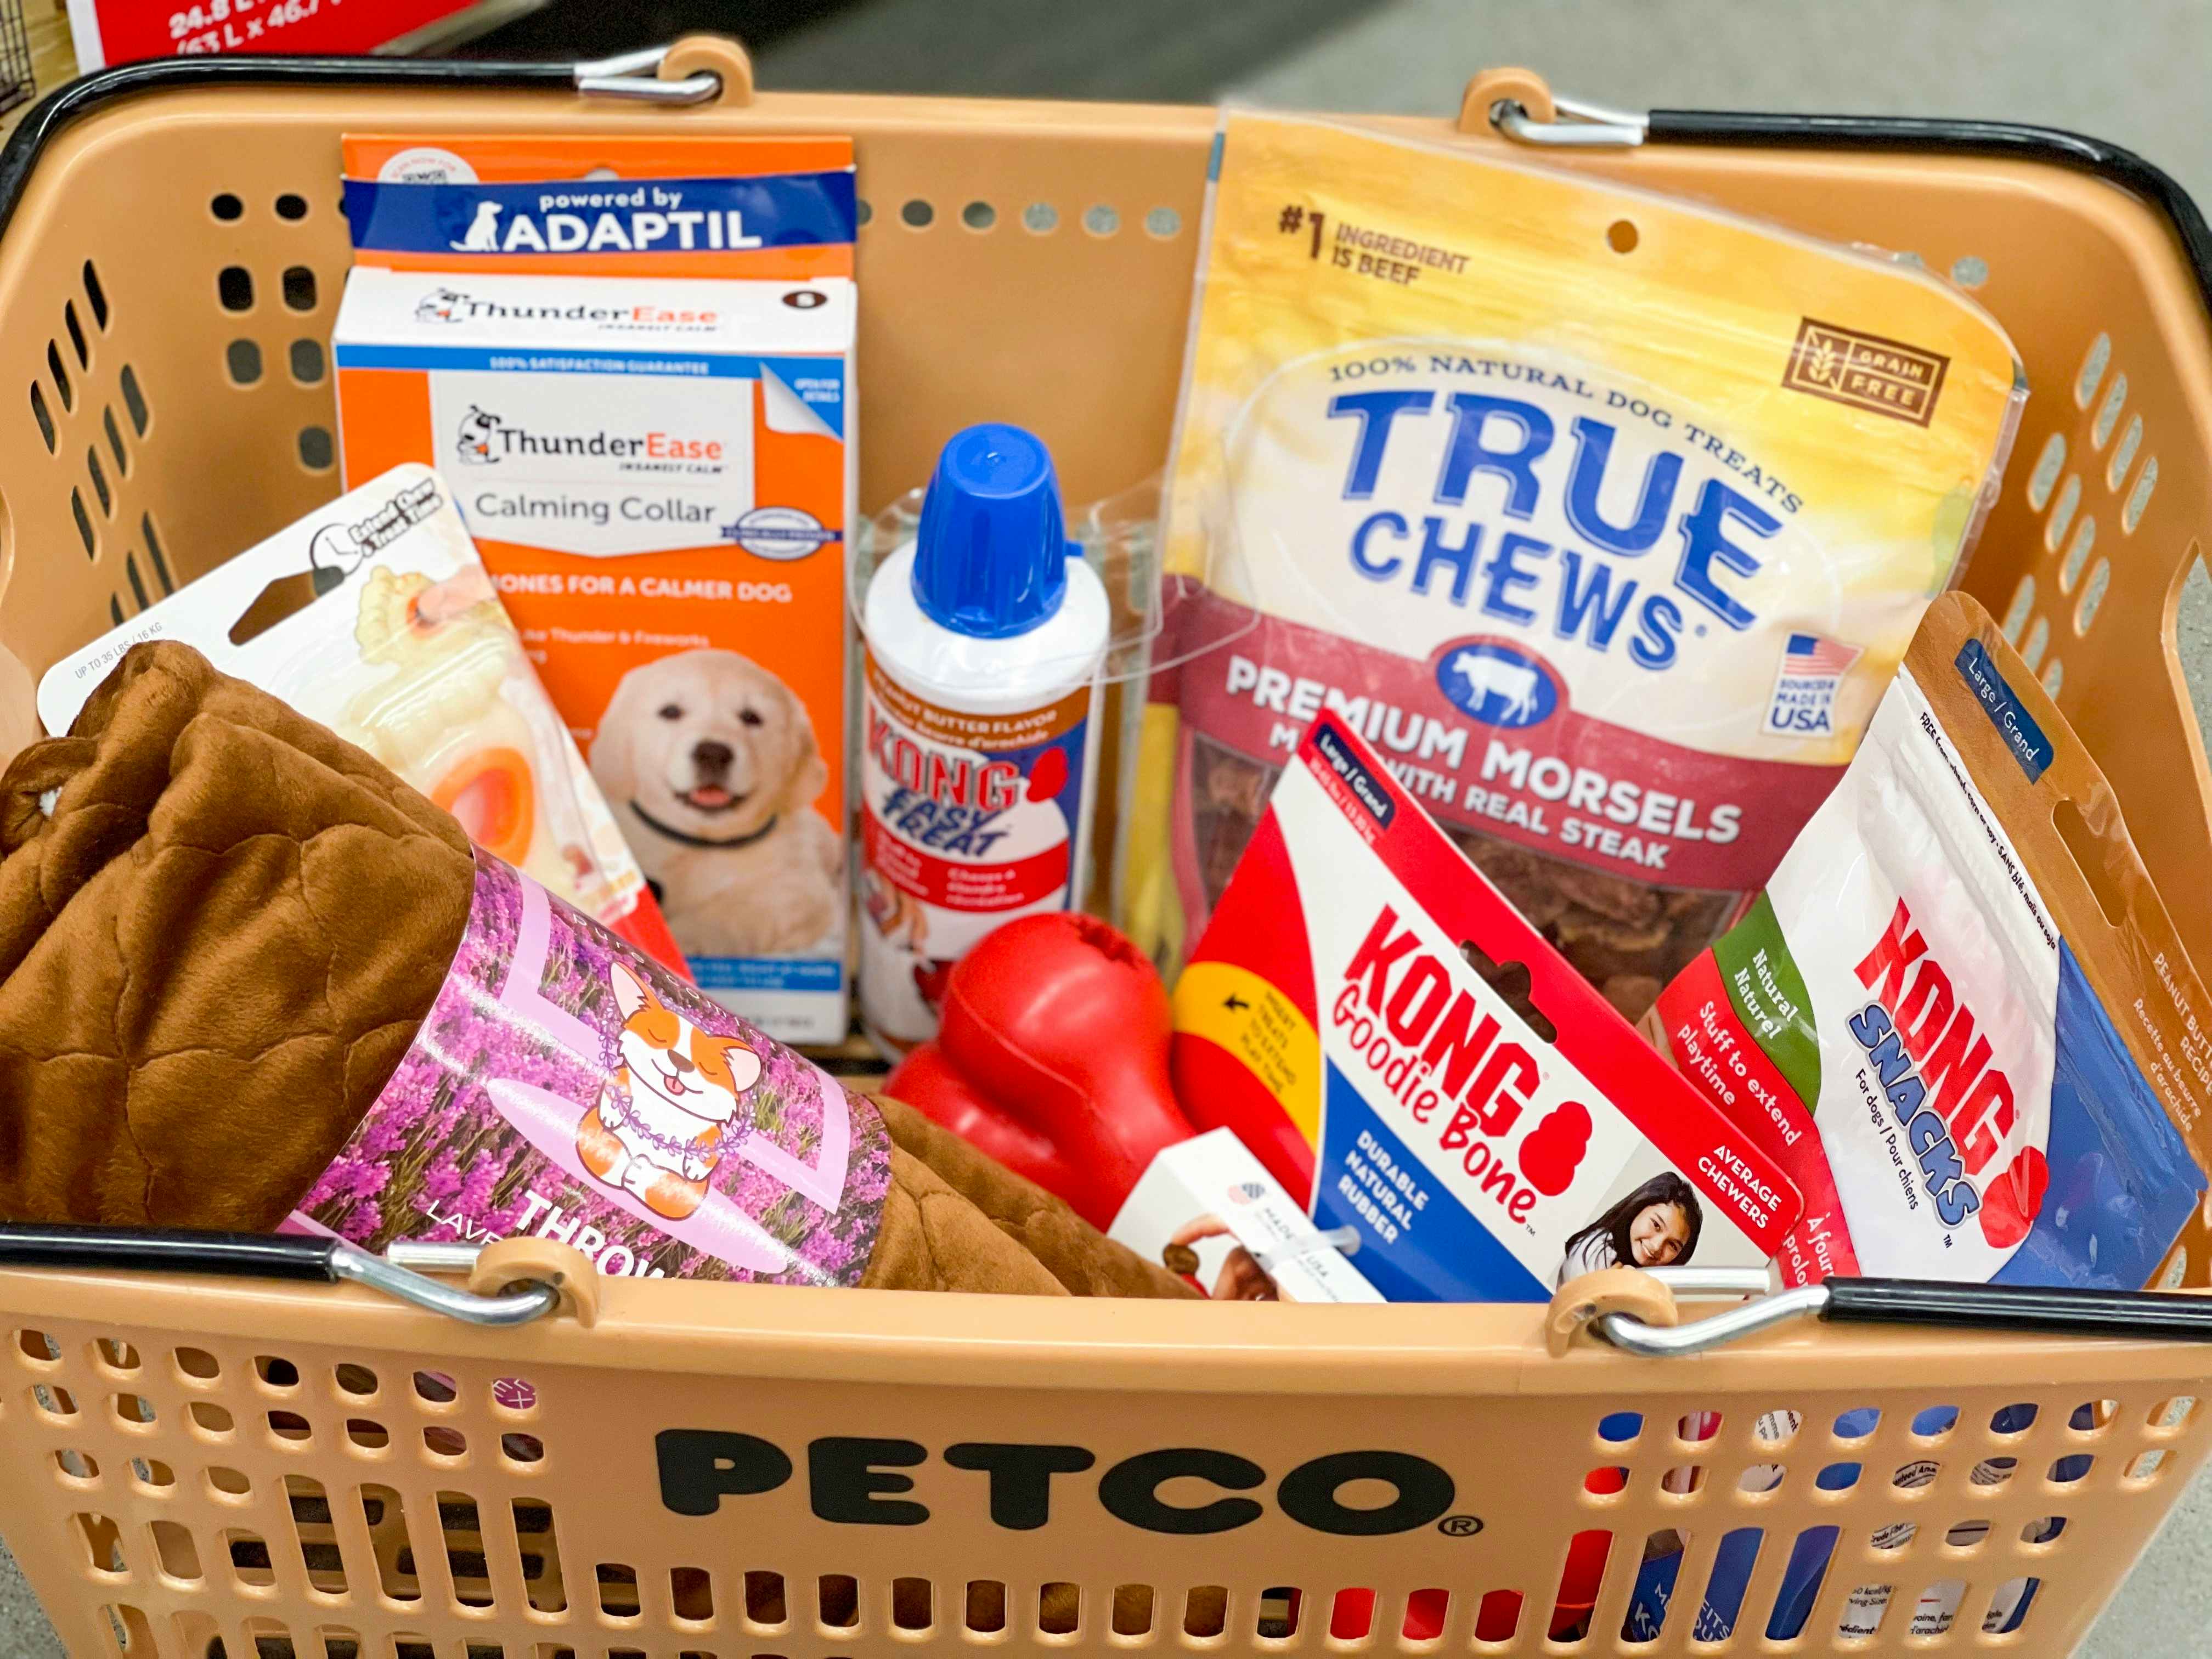 Petco basket with dog toys, dog chews, and other pet supplies